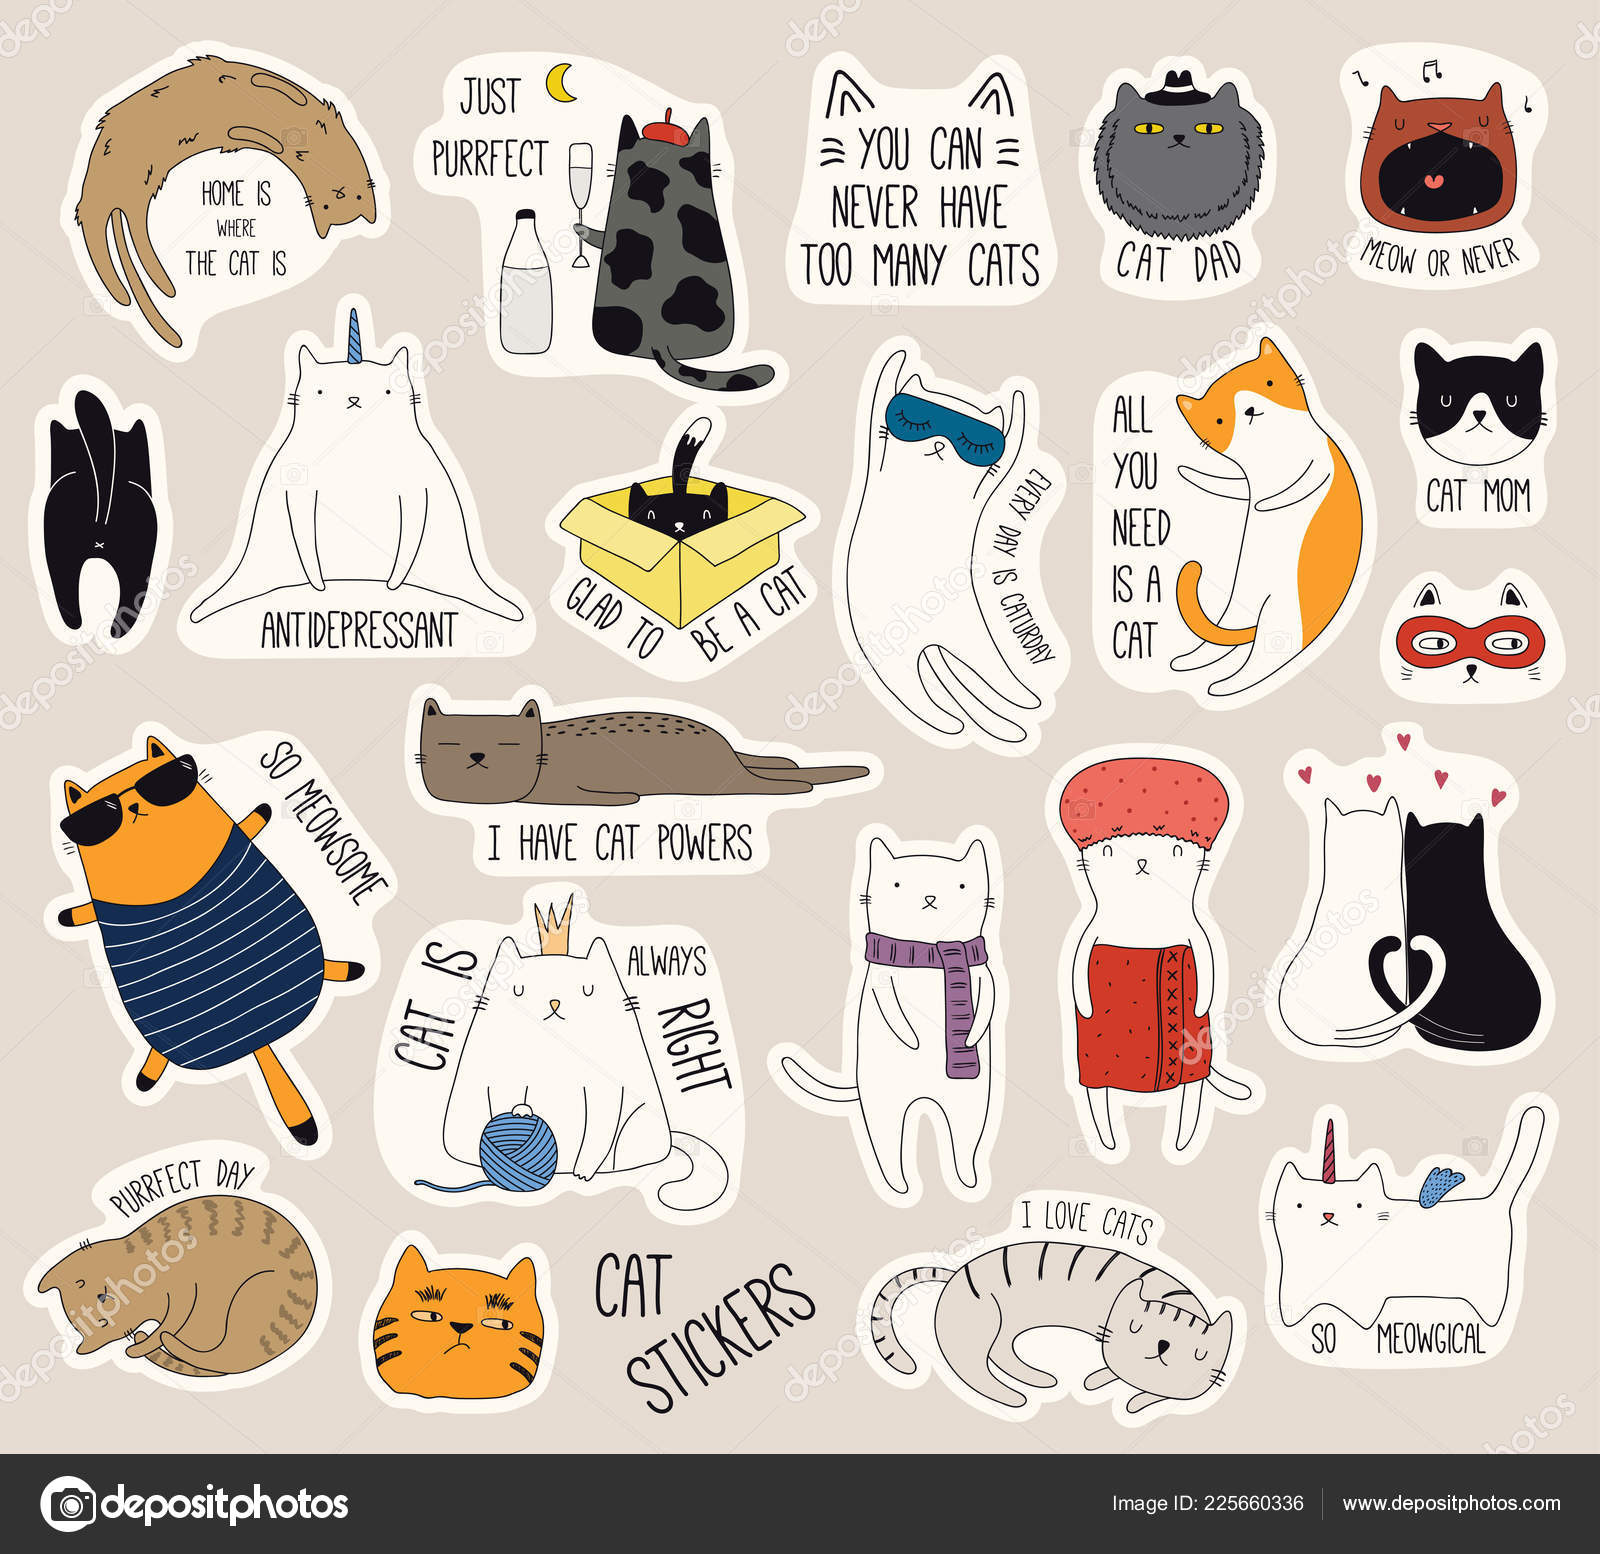 Silly Stickers, Unique Designs